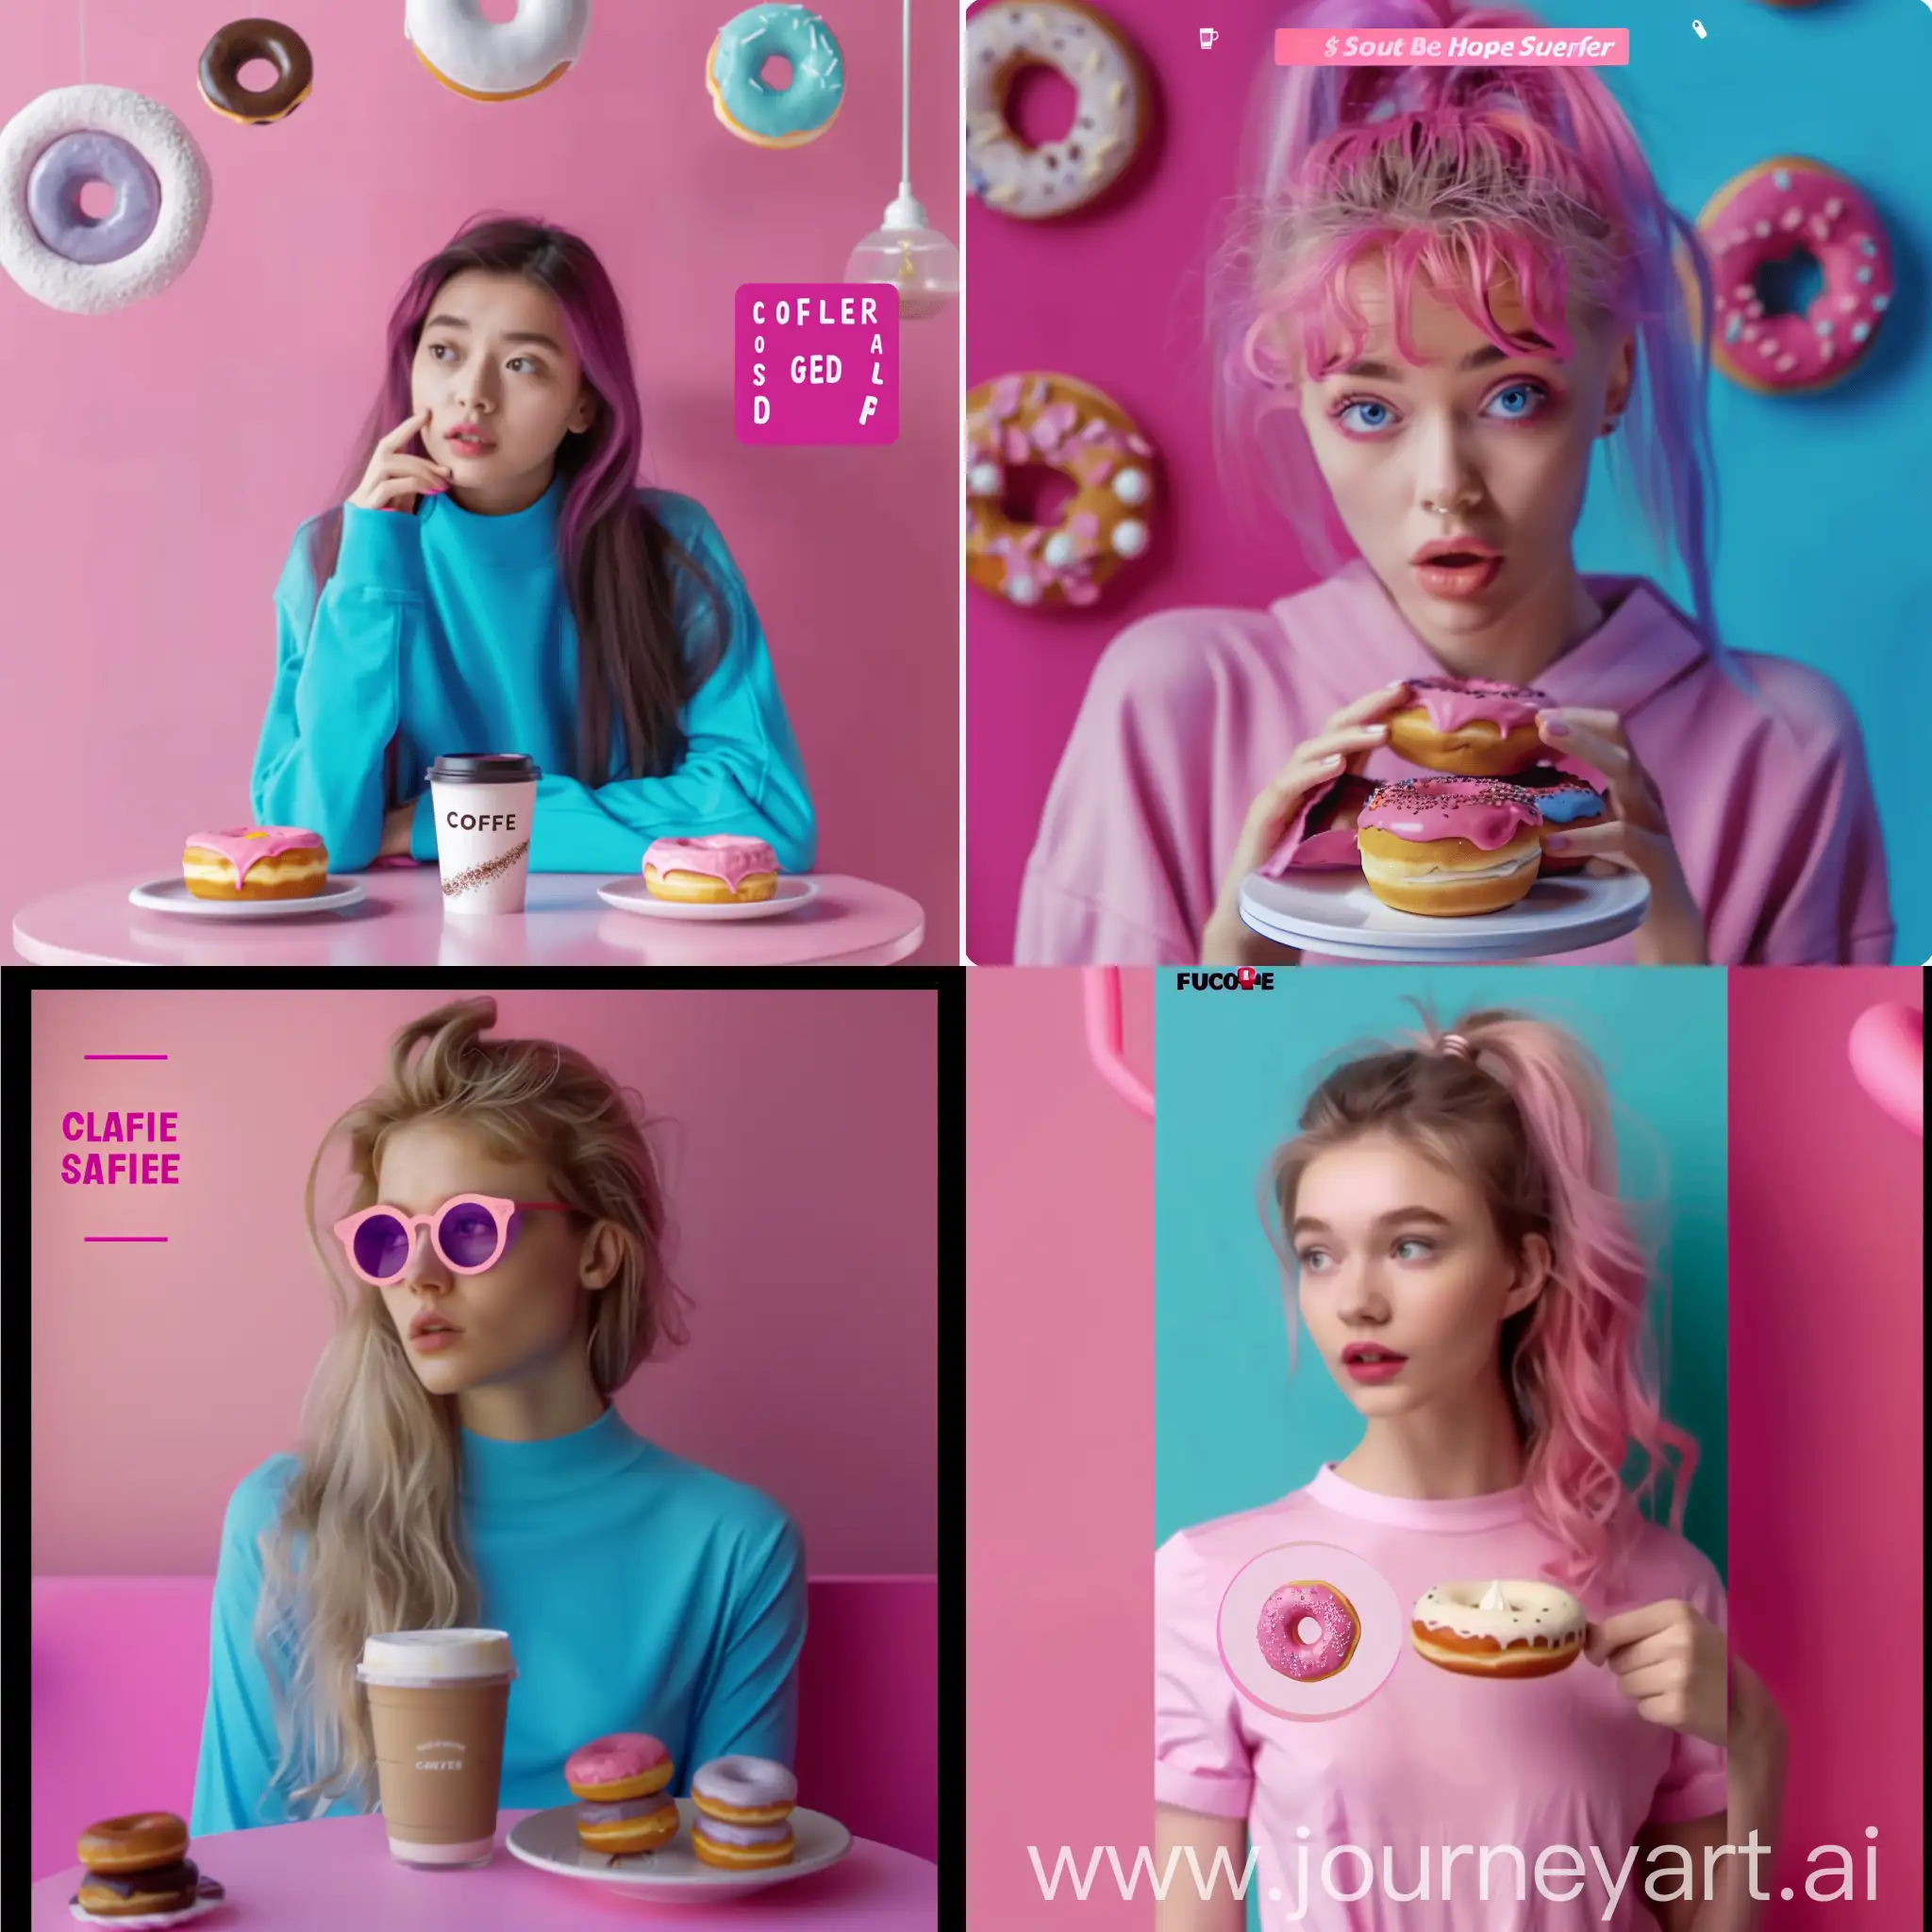 Minimalist-Coffee-Shop-Scene-with-Coffee-Donuts-and-Pastries-in-Pink-and-Blue